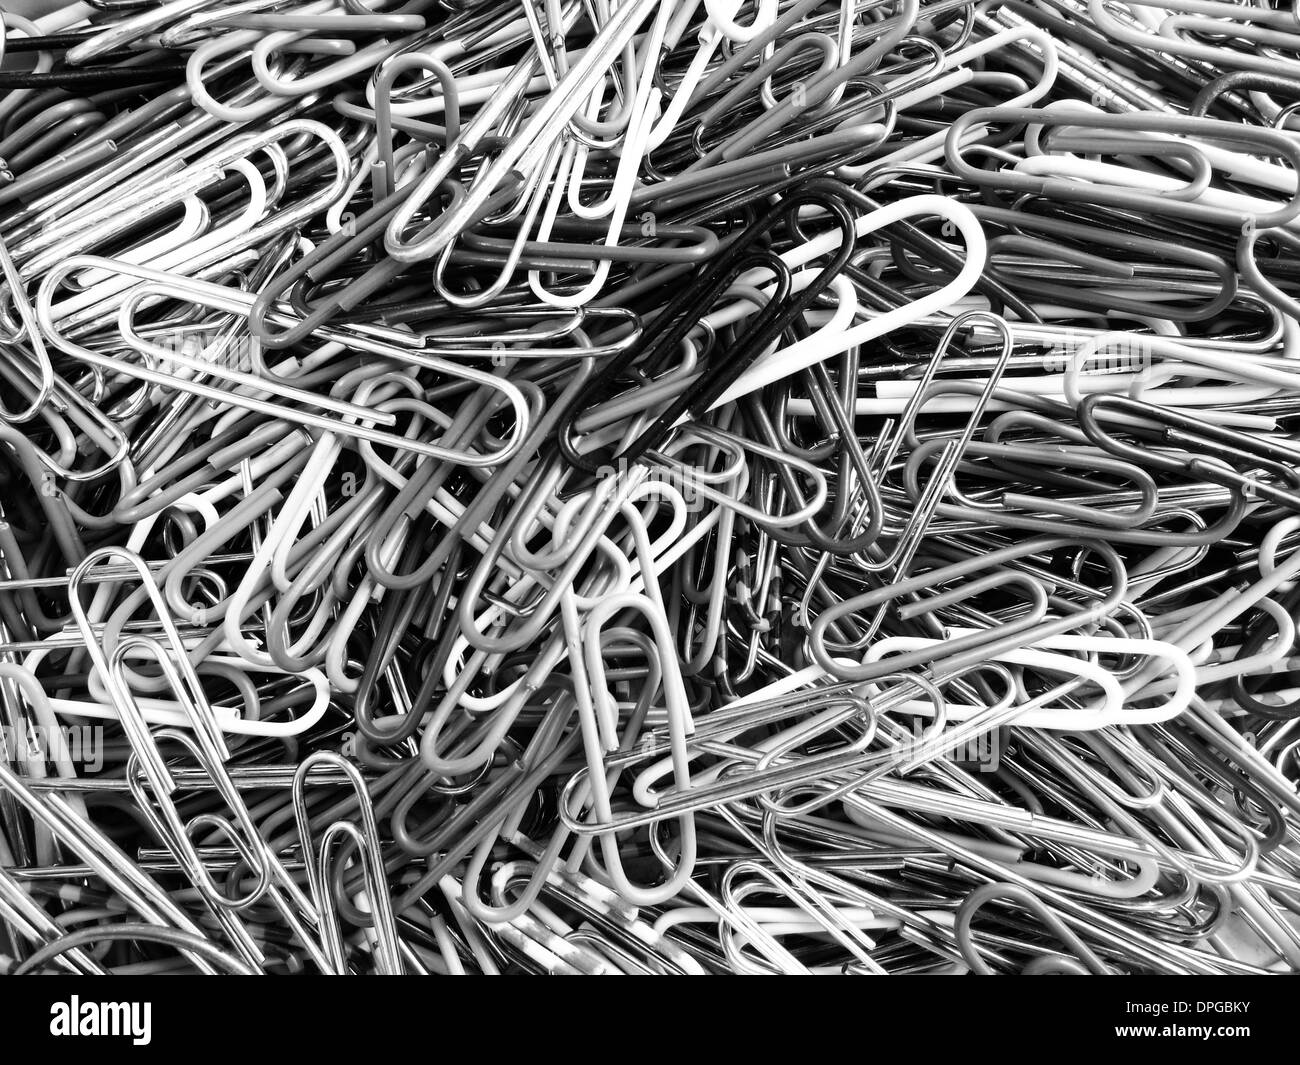 Detail closeup pile of paperclips paper clips Stock Photo